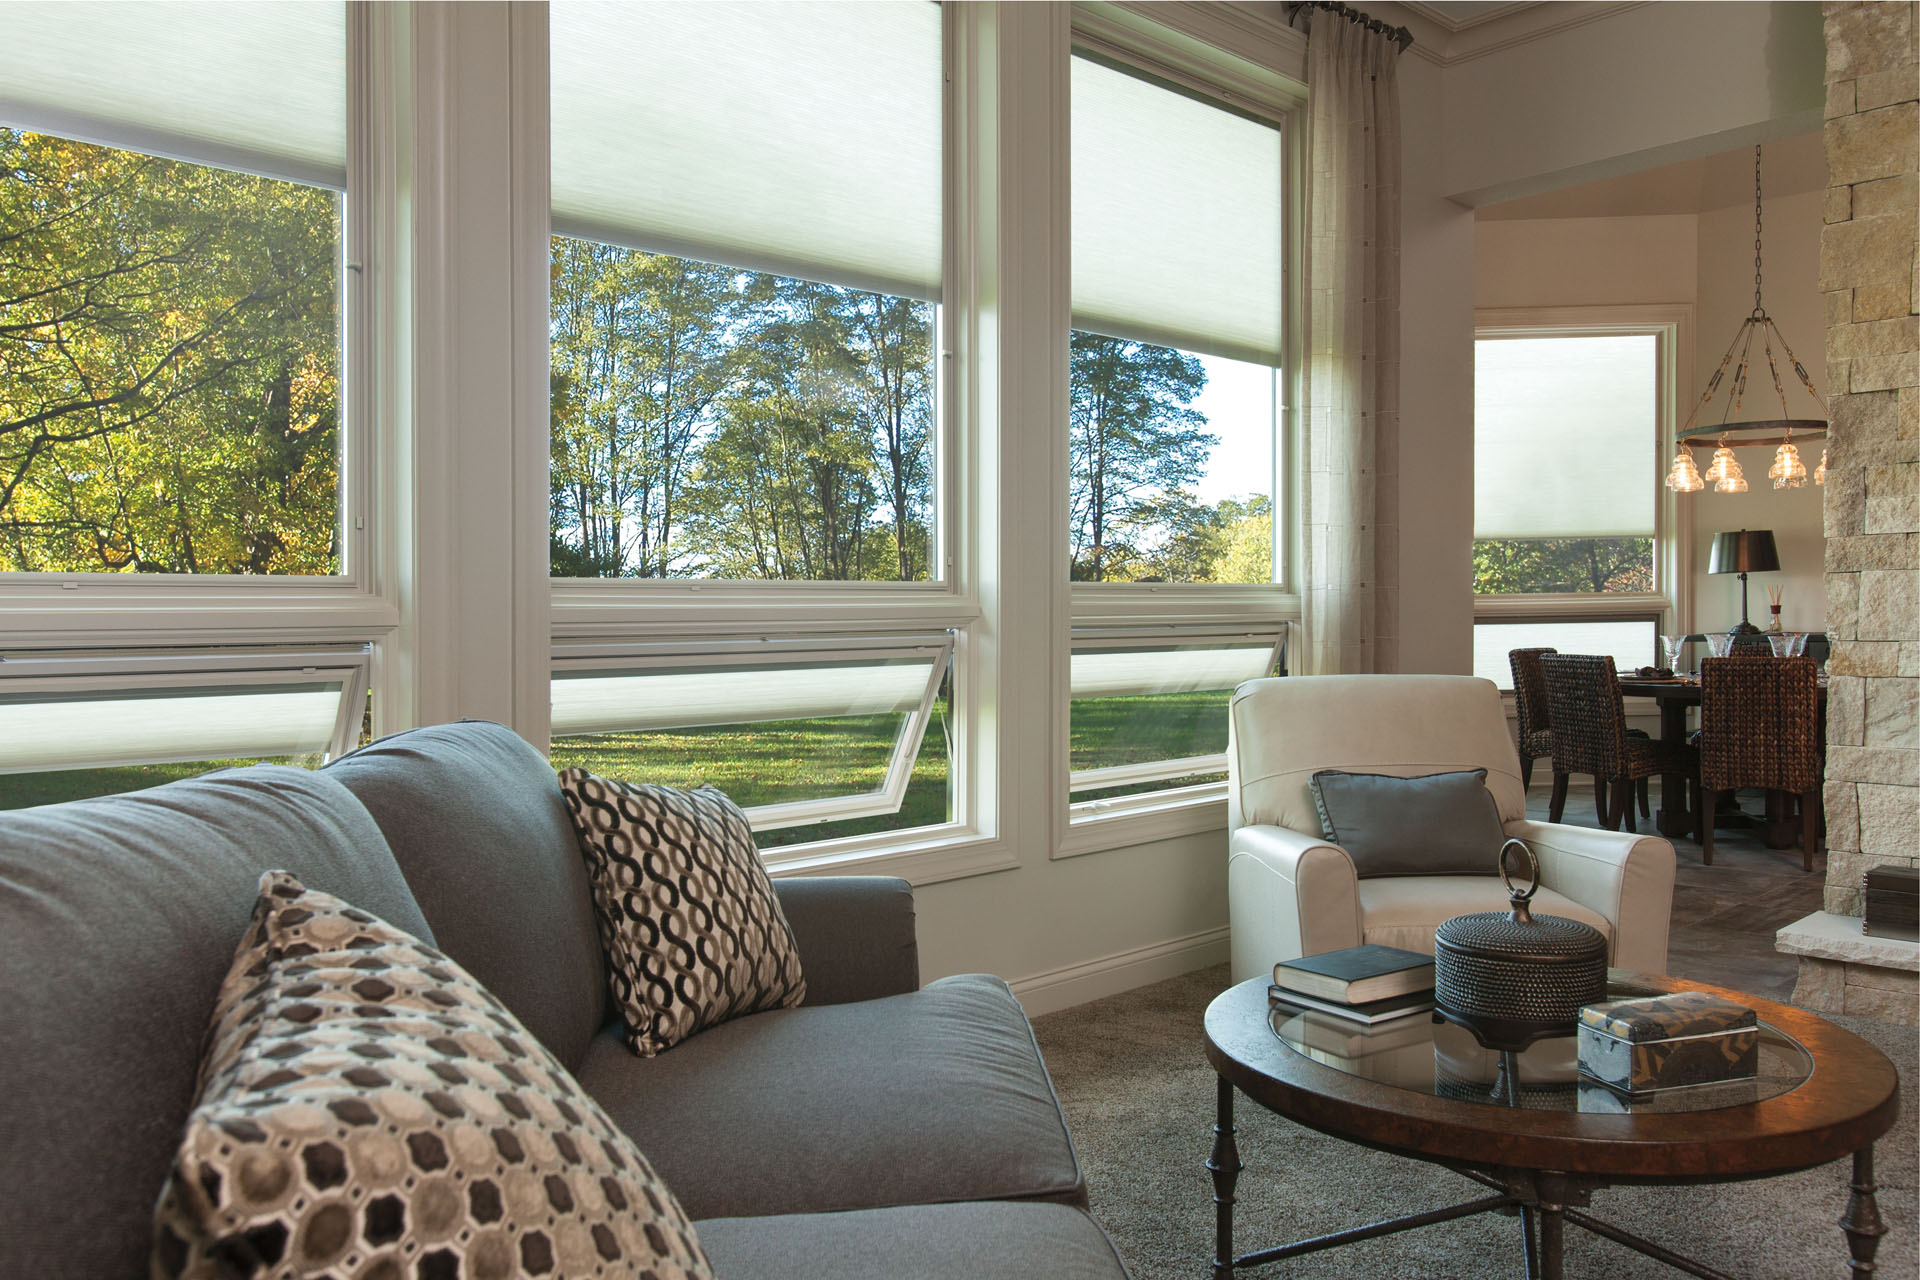 picture windows and awning windows in a sitting room